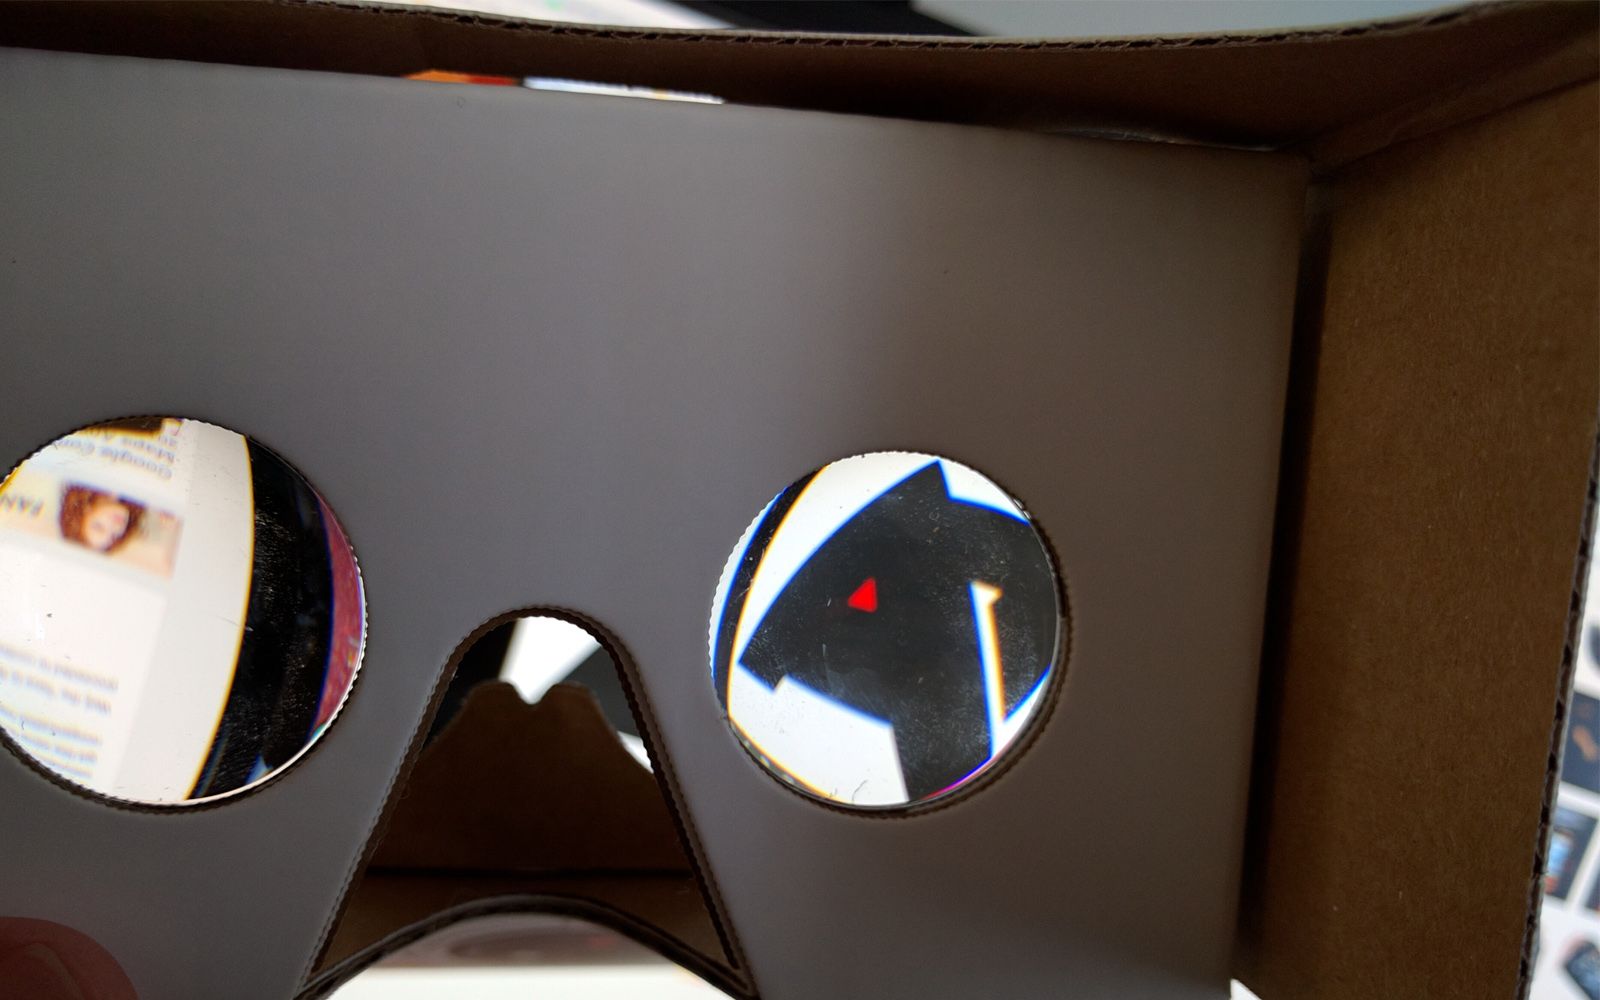 A look through the lenses of a Google Cardboard with the Android Police logo visible in the right eye